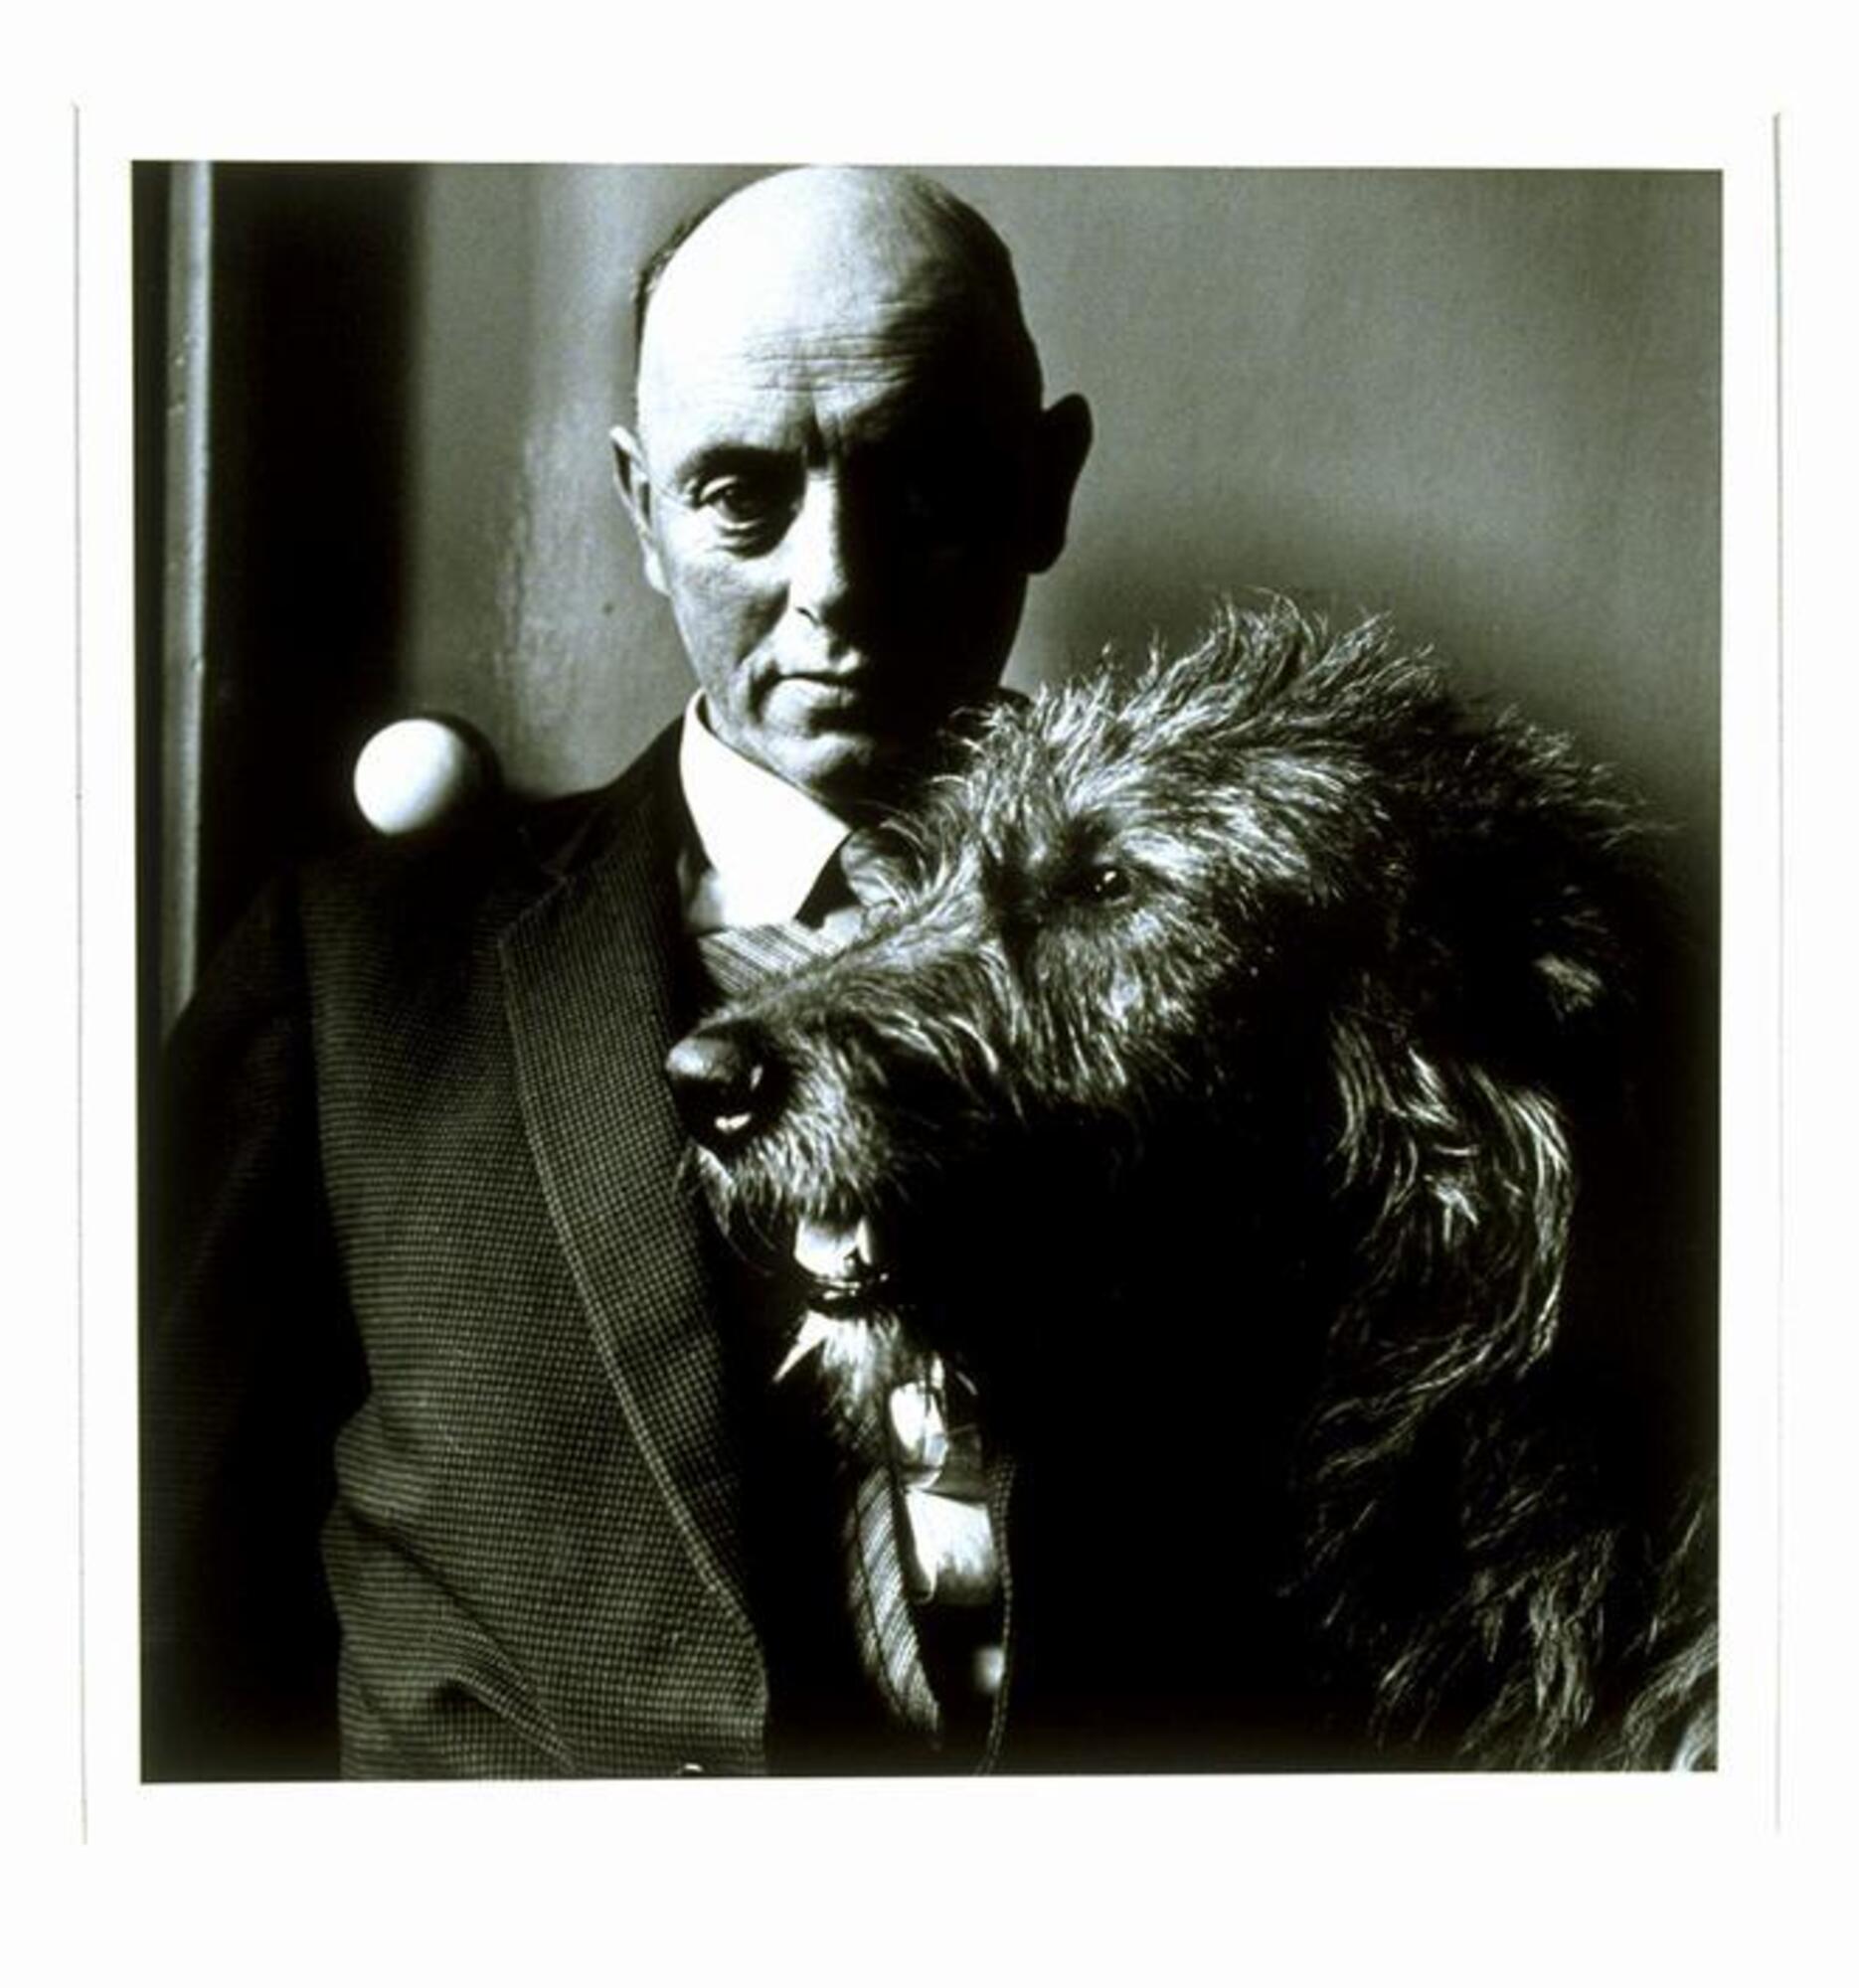 This photograph depicts a middle-aged man in a suit seated with his dog. The two figures sit inside a domestic space.